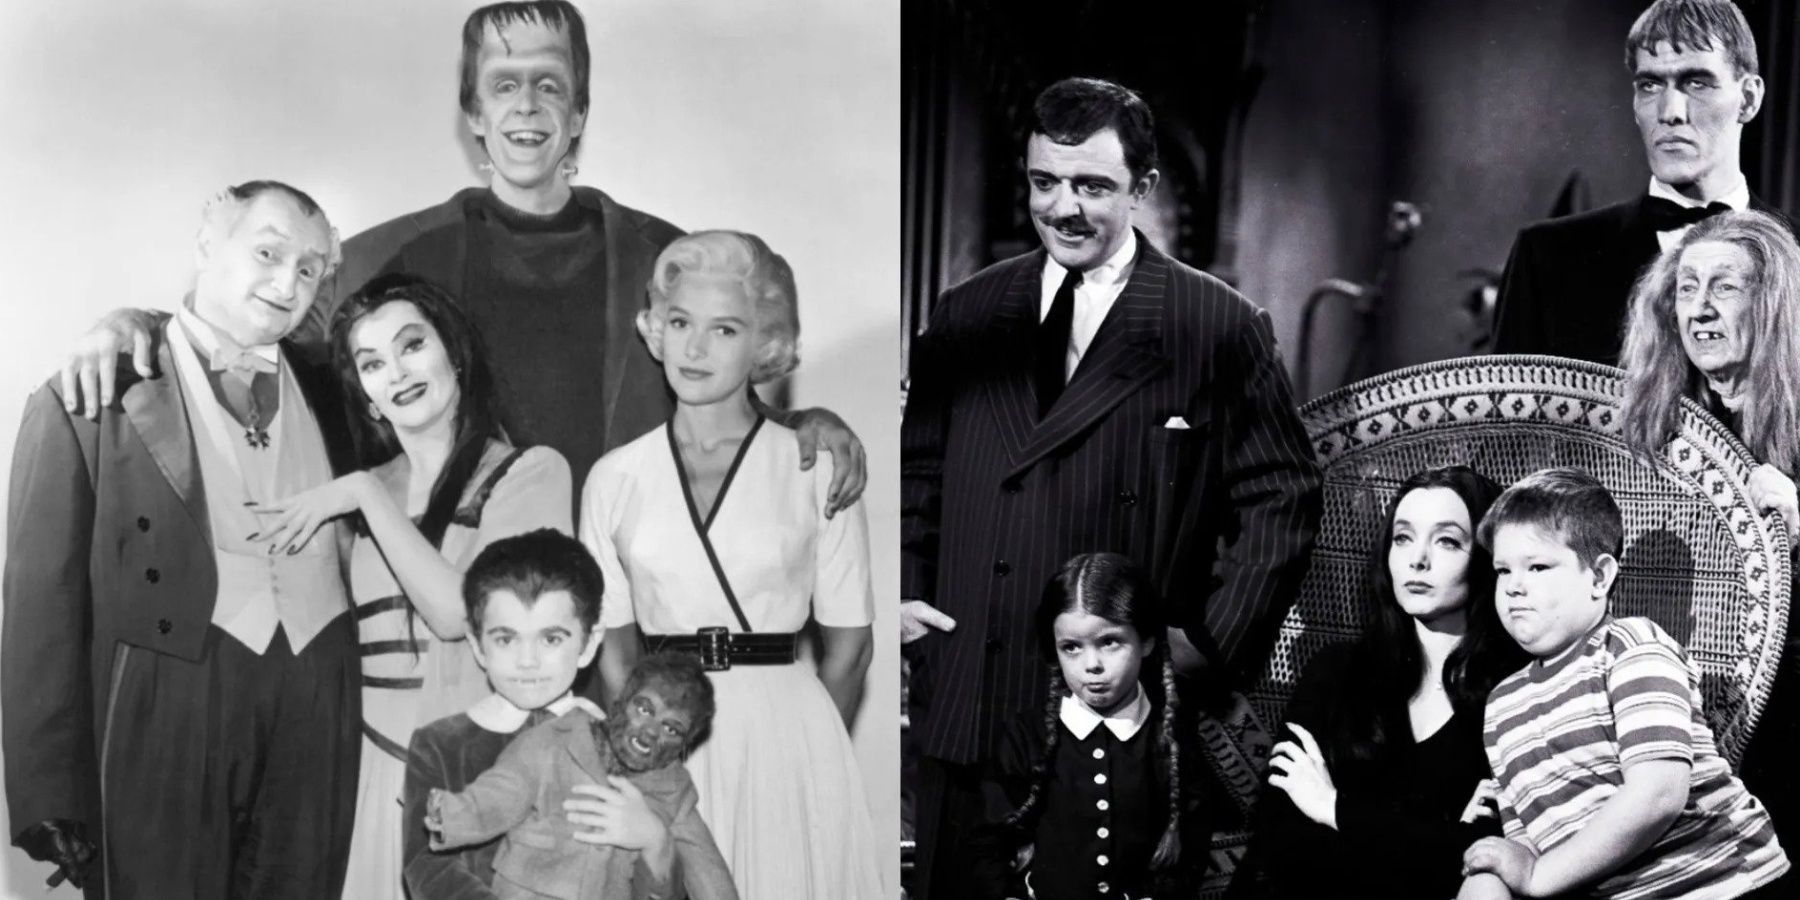 Munsters Addams Family